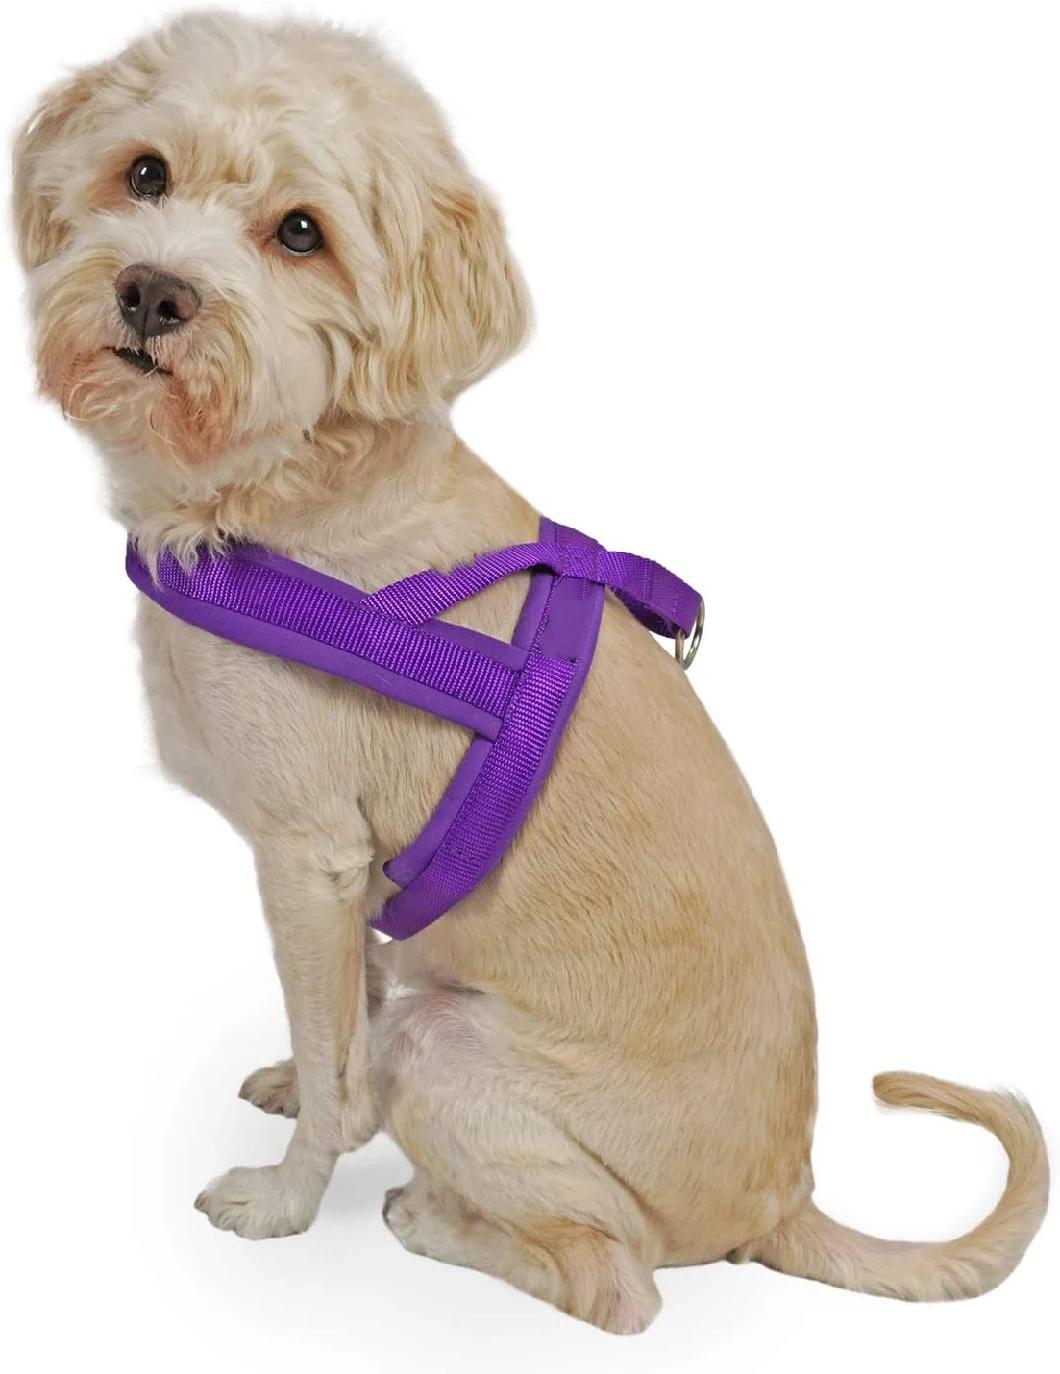 Dog Harness Easy on and off with 1 Clip for Walk with Small Dogs Pet Supply